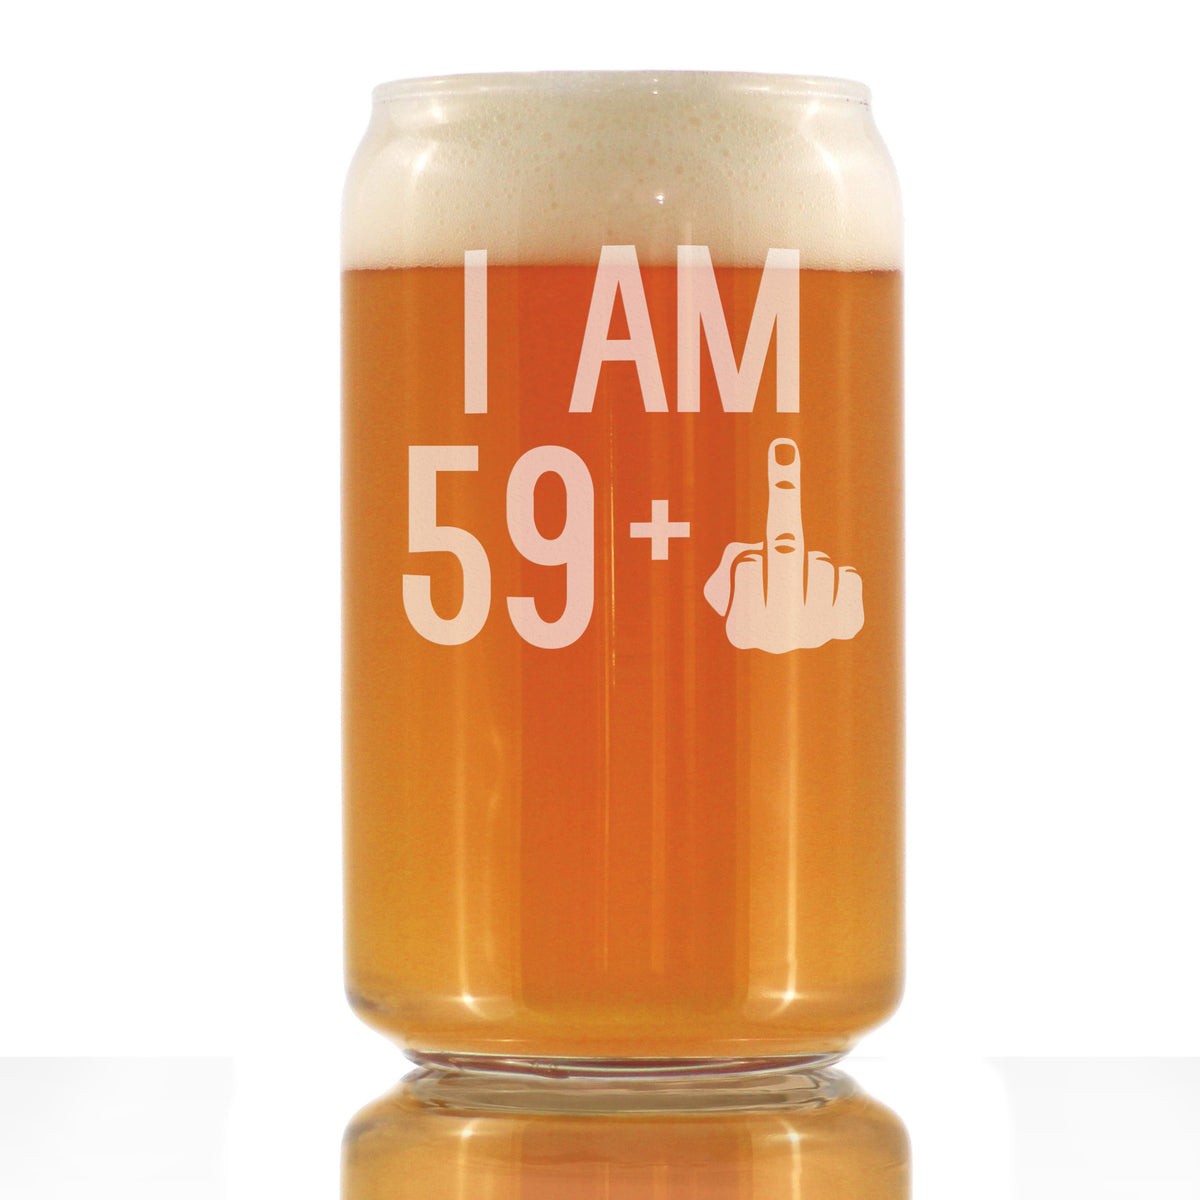 I Am 59 + 1 Middle Finger - 16 oz Beer Can Pint Glass - Funny 60th Birthday Gifts for Men or Women Turning 60